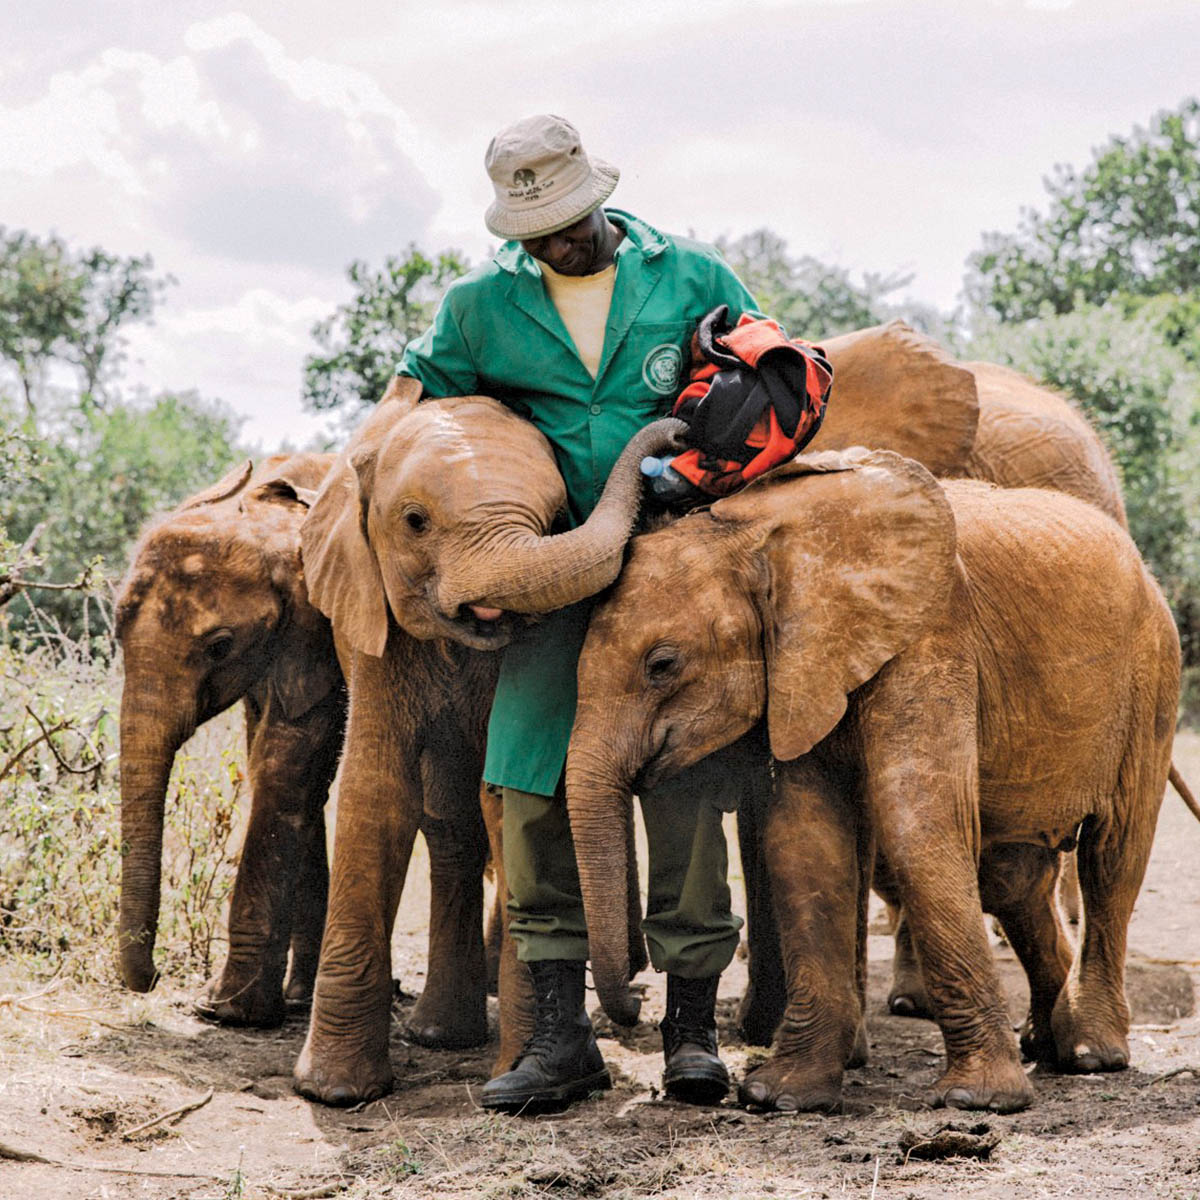 Man surrounded by baby elephants